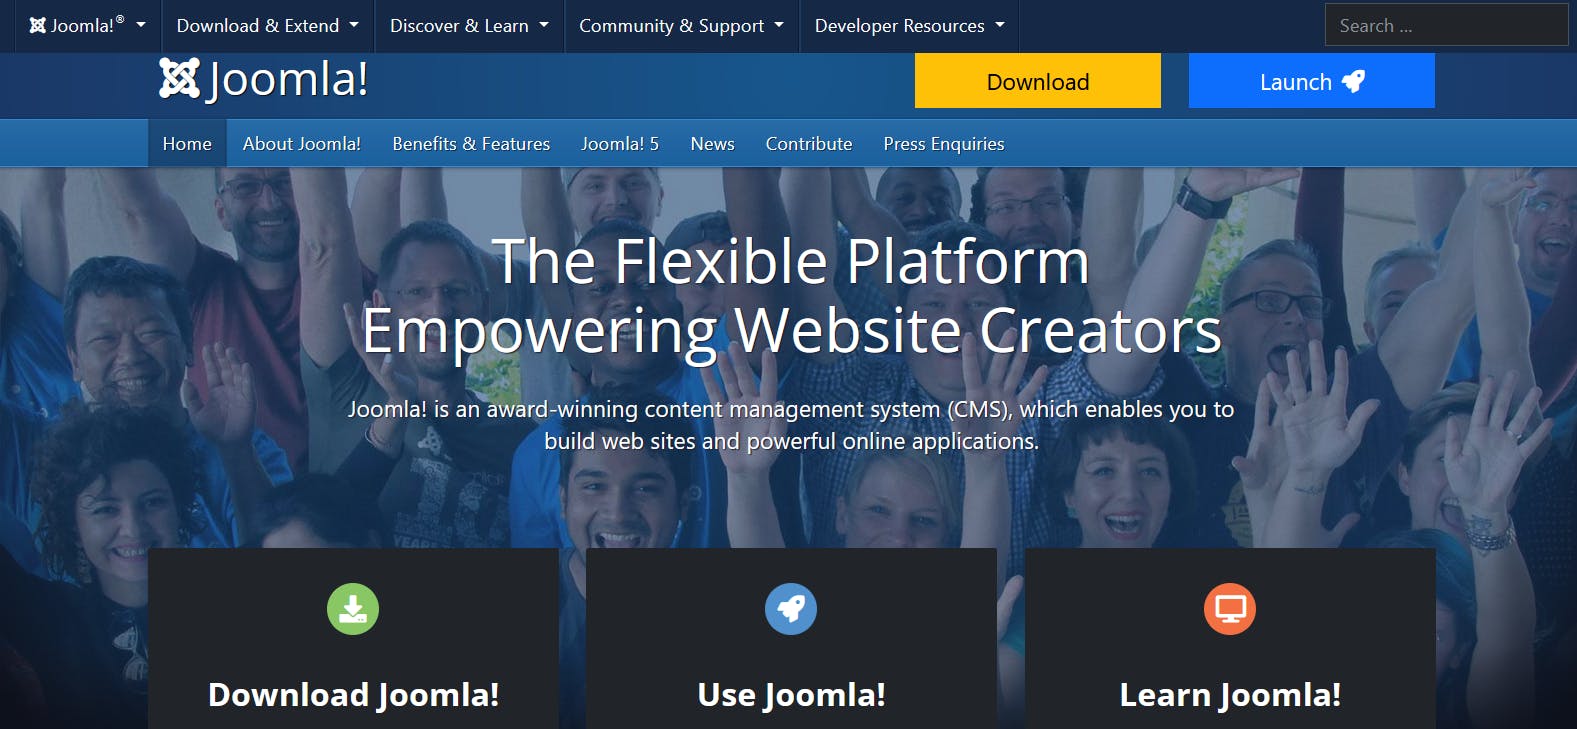 An image of the Joomla landing page.